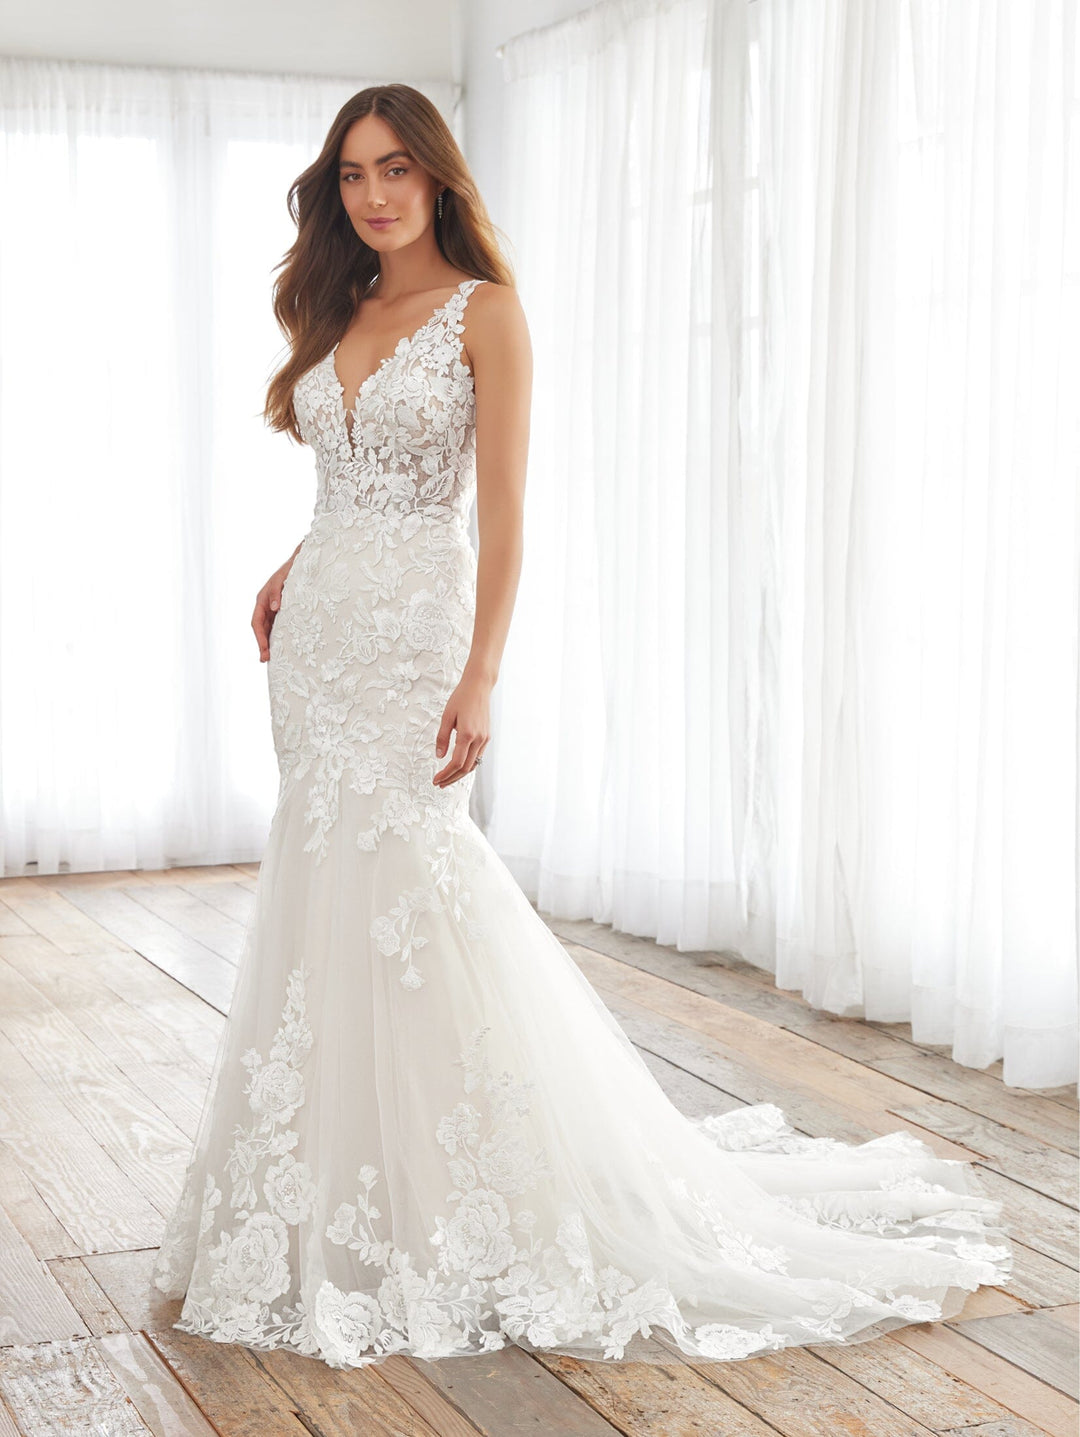 Applique Mermaid Bridal Gown by Adrianna Papell 31235